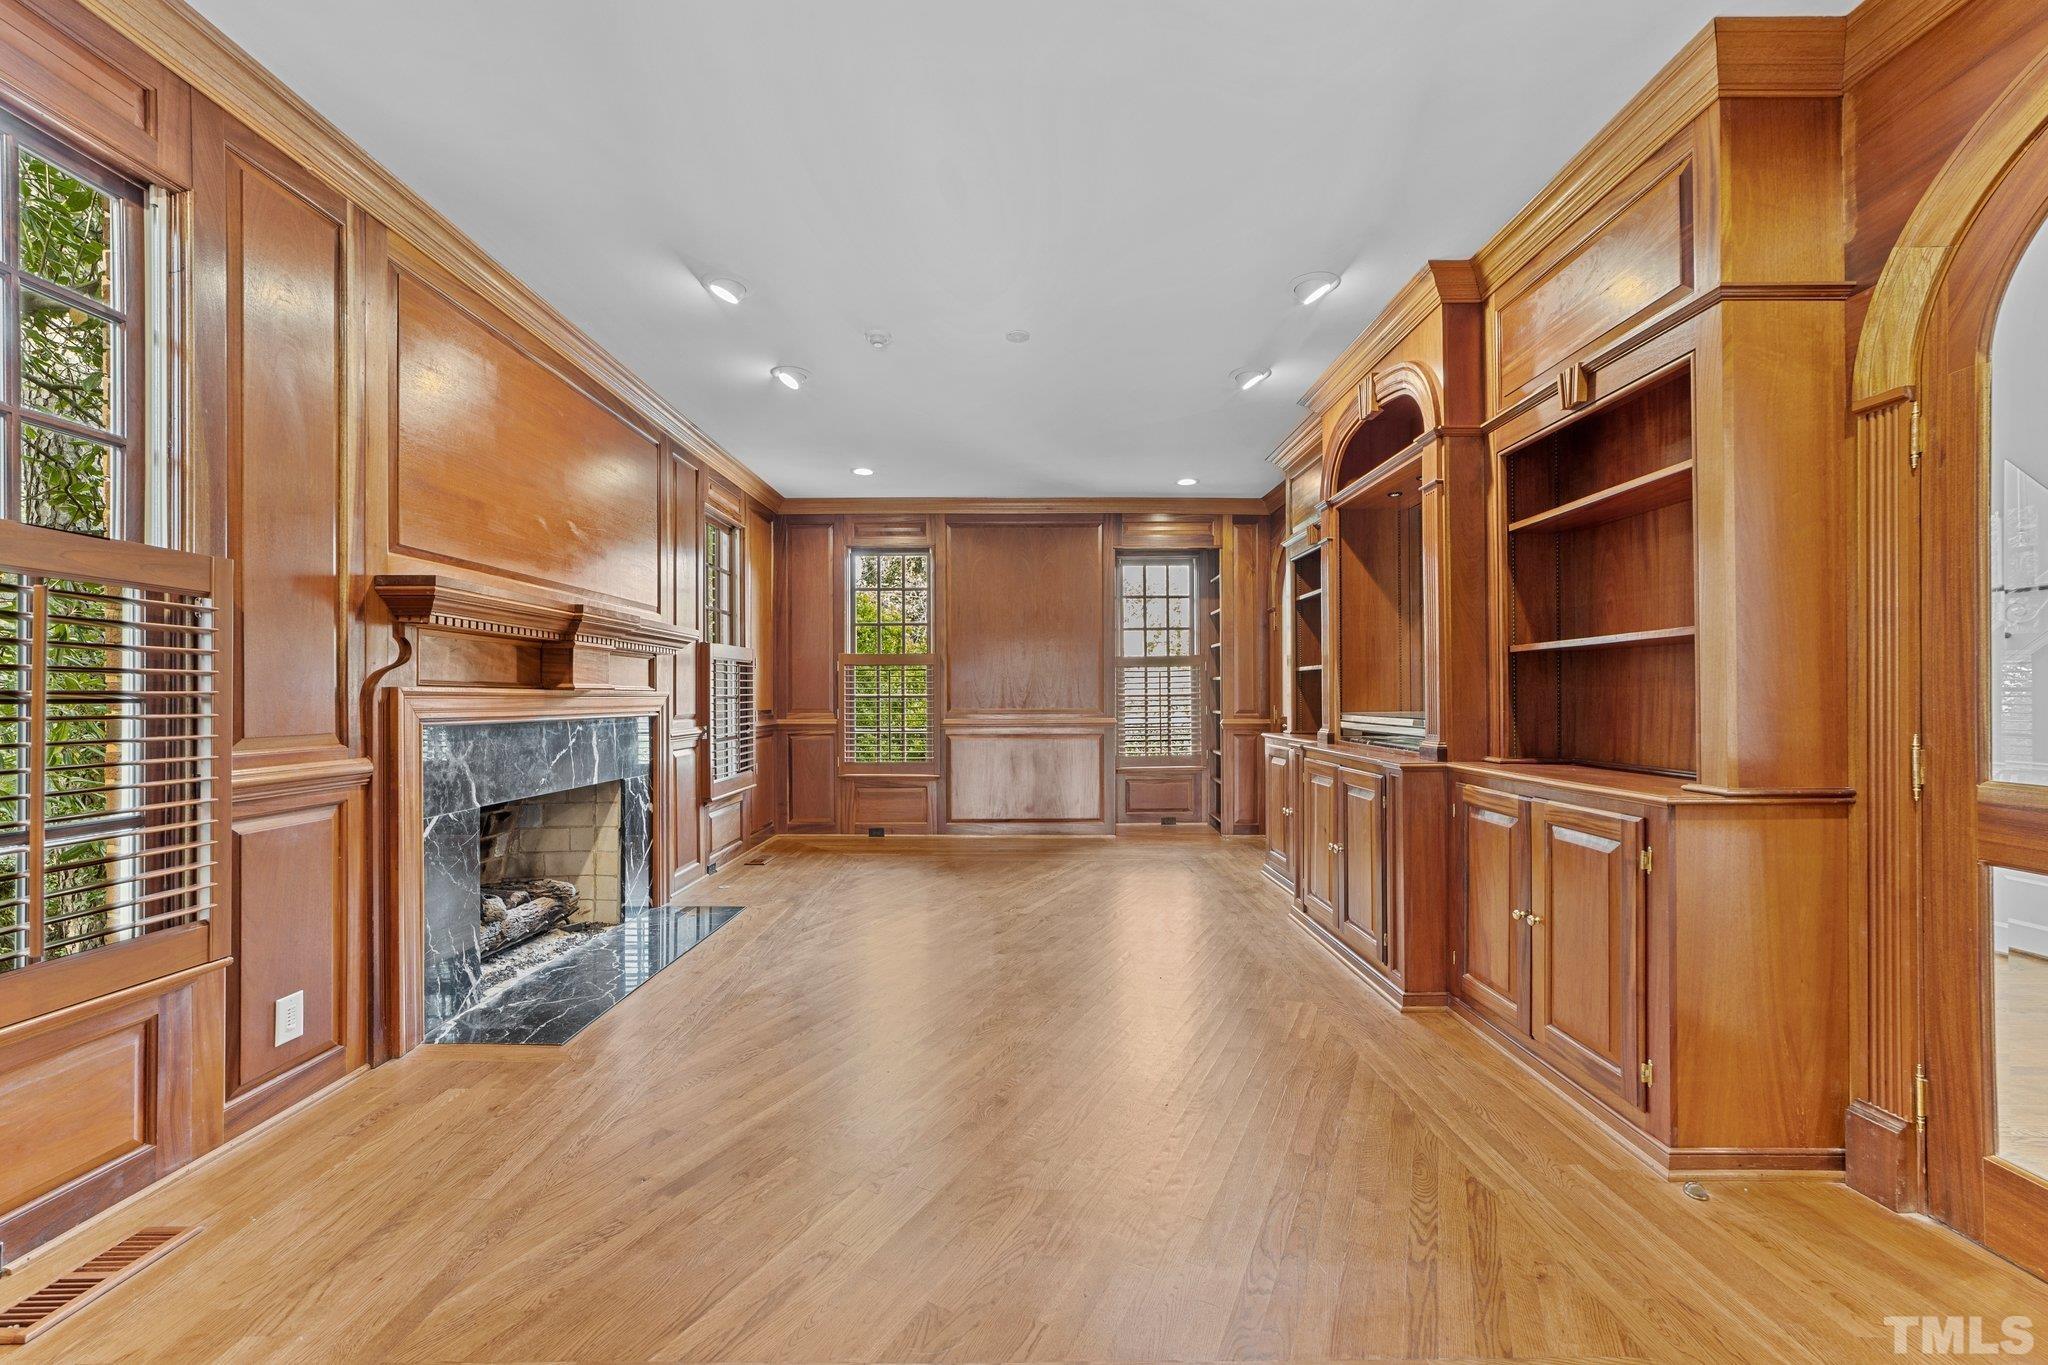 Handsome polished mahoghany walls, masonry marble faced fireplace and built in bookcases create a one of a kind retreat.